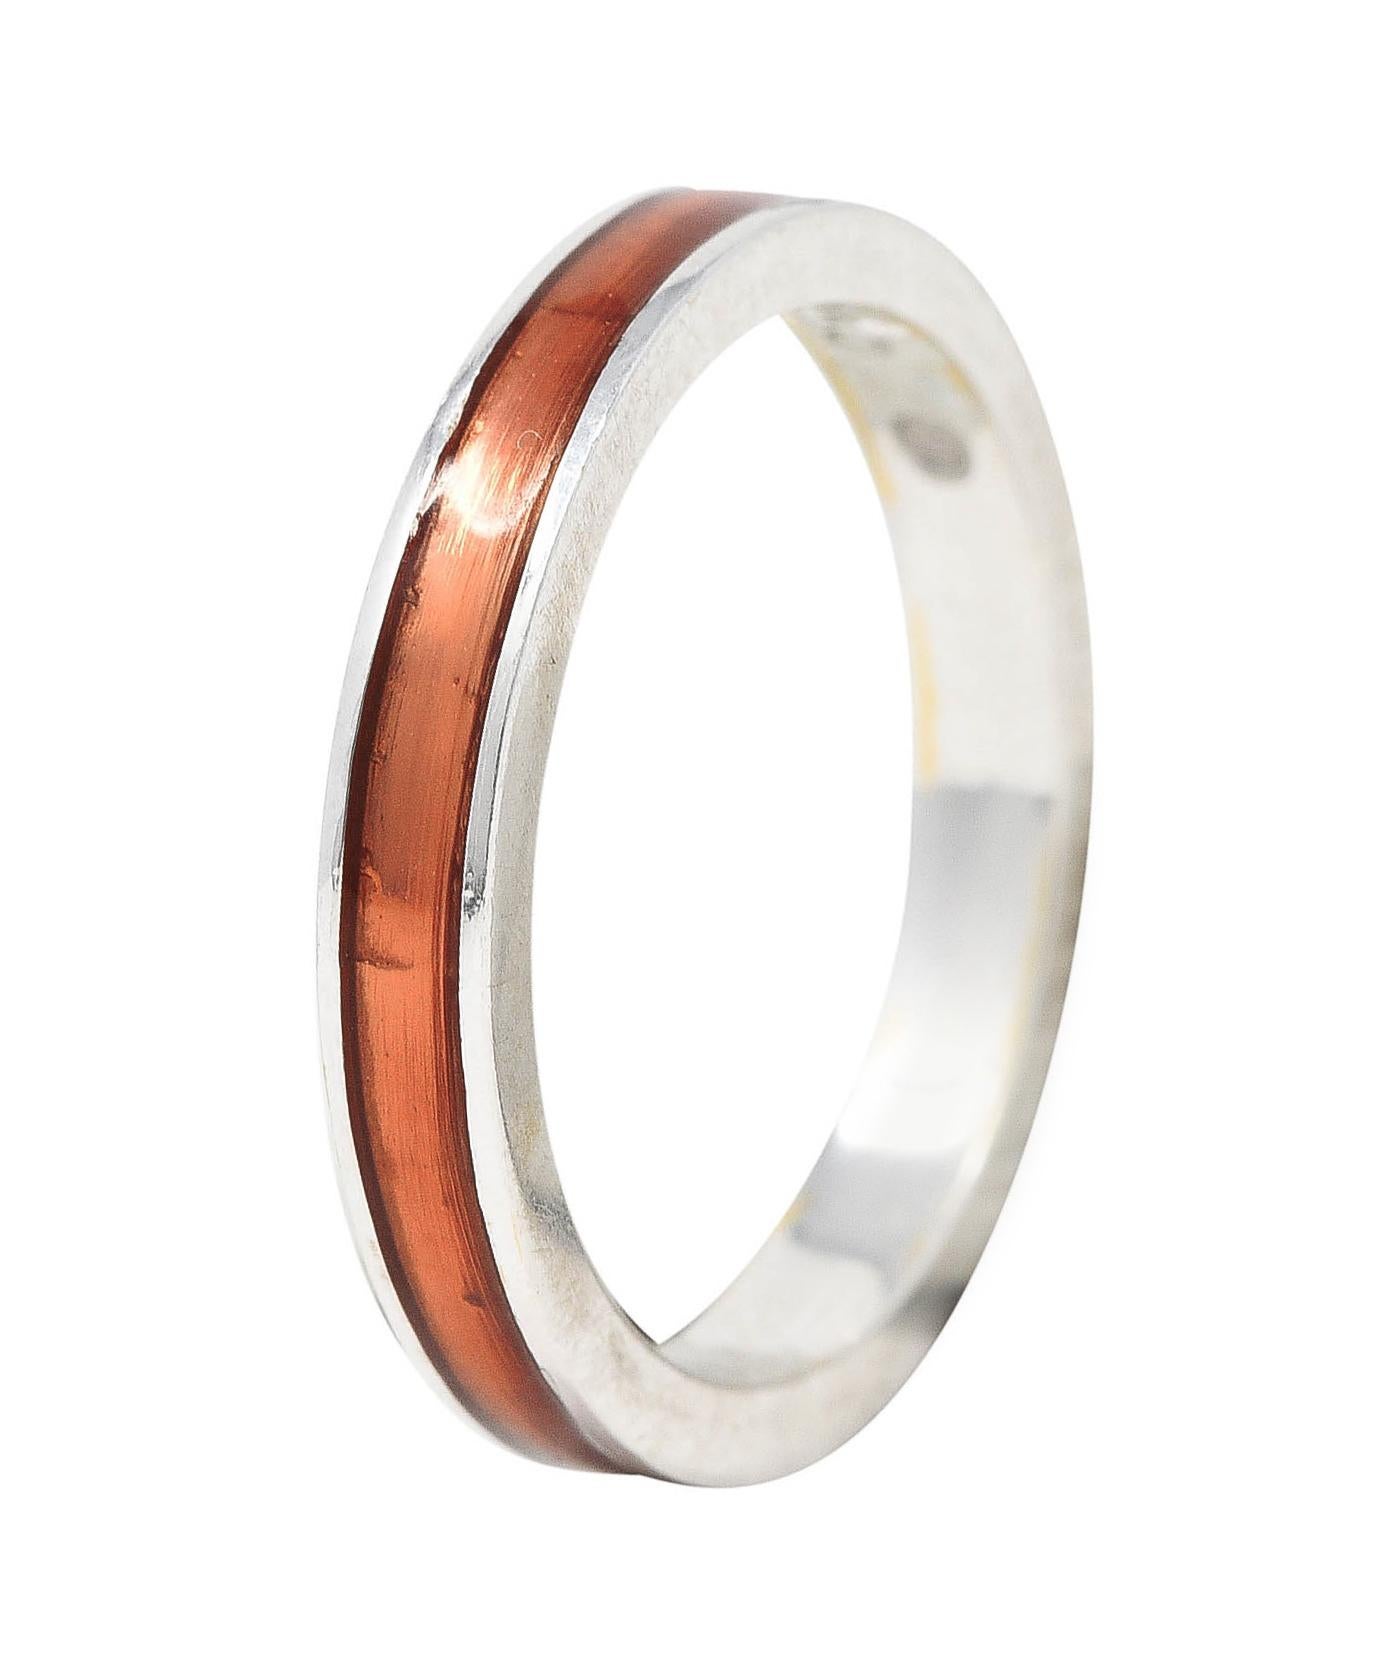 Band ring features a recessed enamel channel fully around. Glossy and transparent light orange in color. With high polished white gold surround. Stamped 750 for 18 karat gold. With maker's mark for Hidalgo. Circa: 1990's. Ring size: 6 1/2 and not